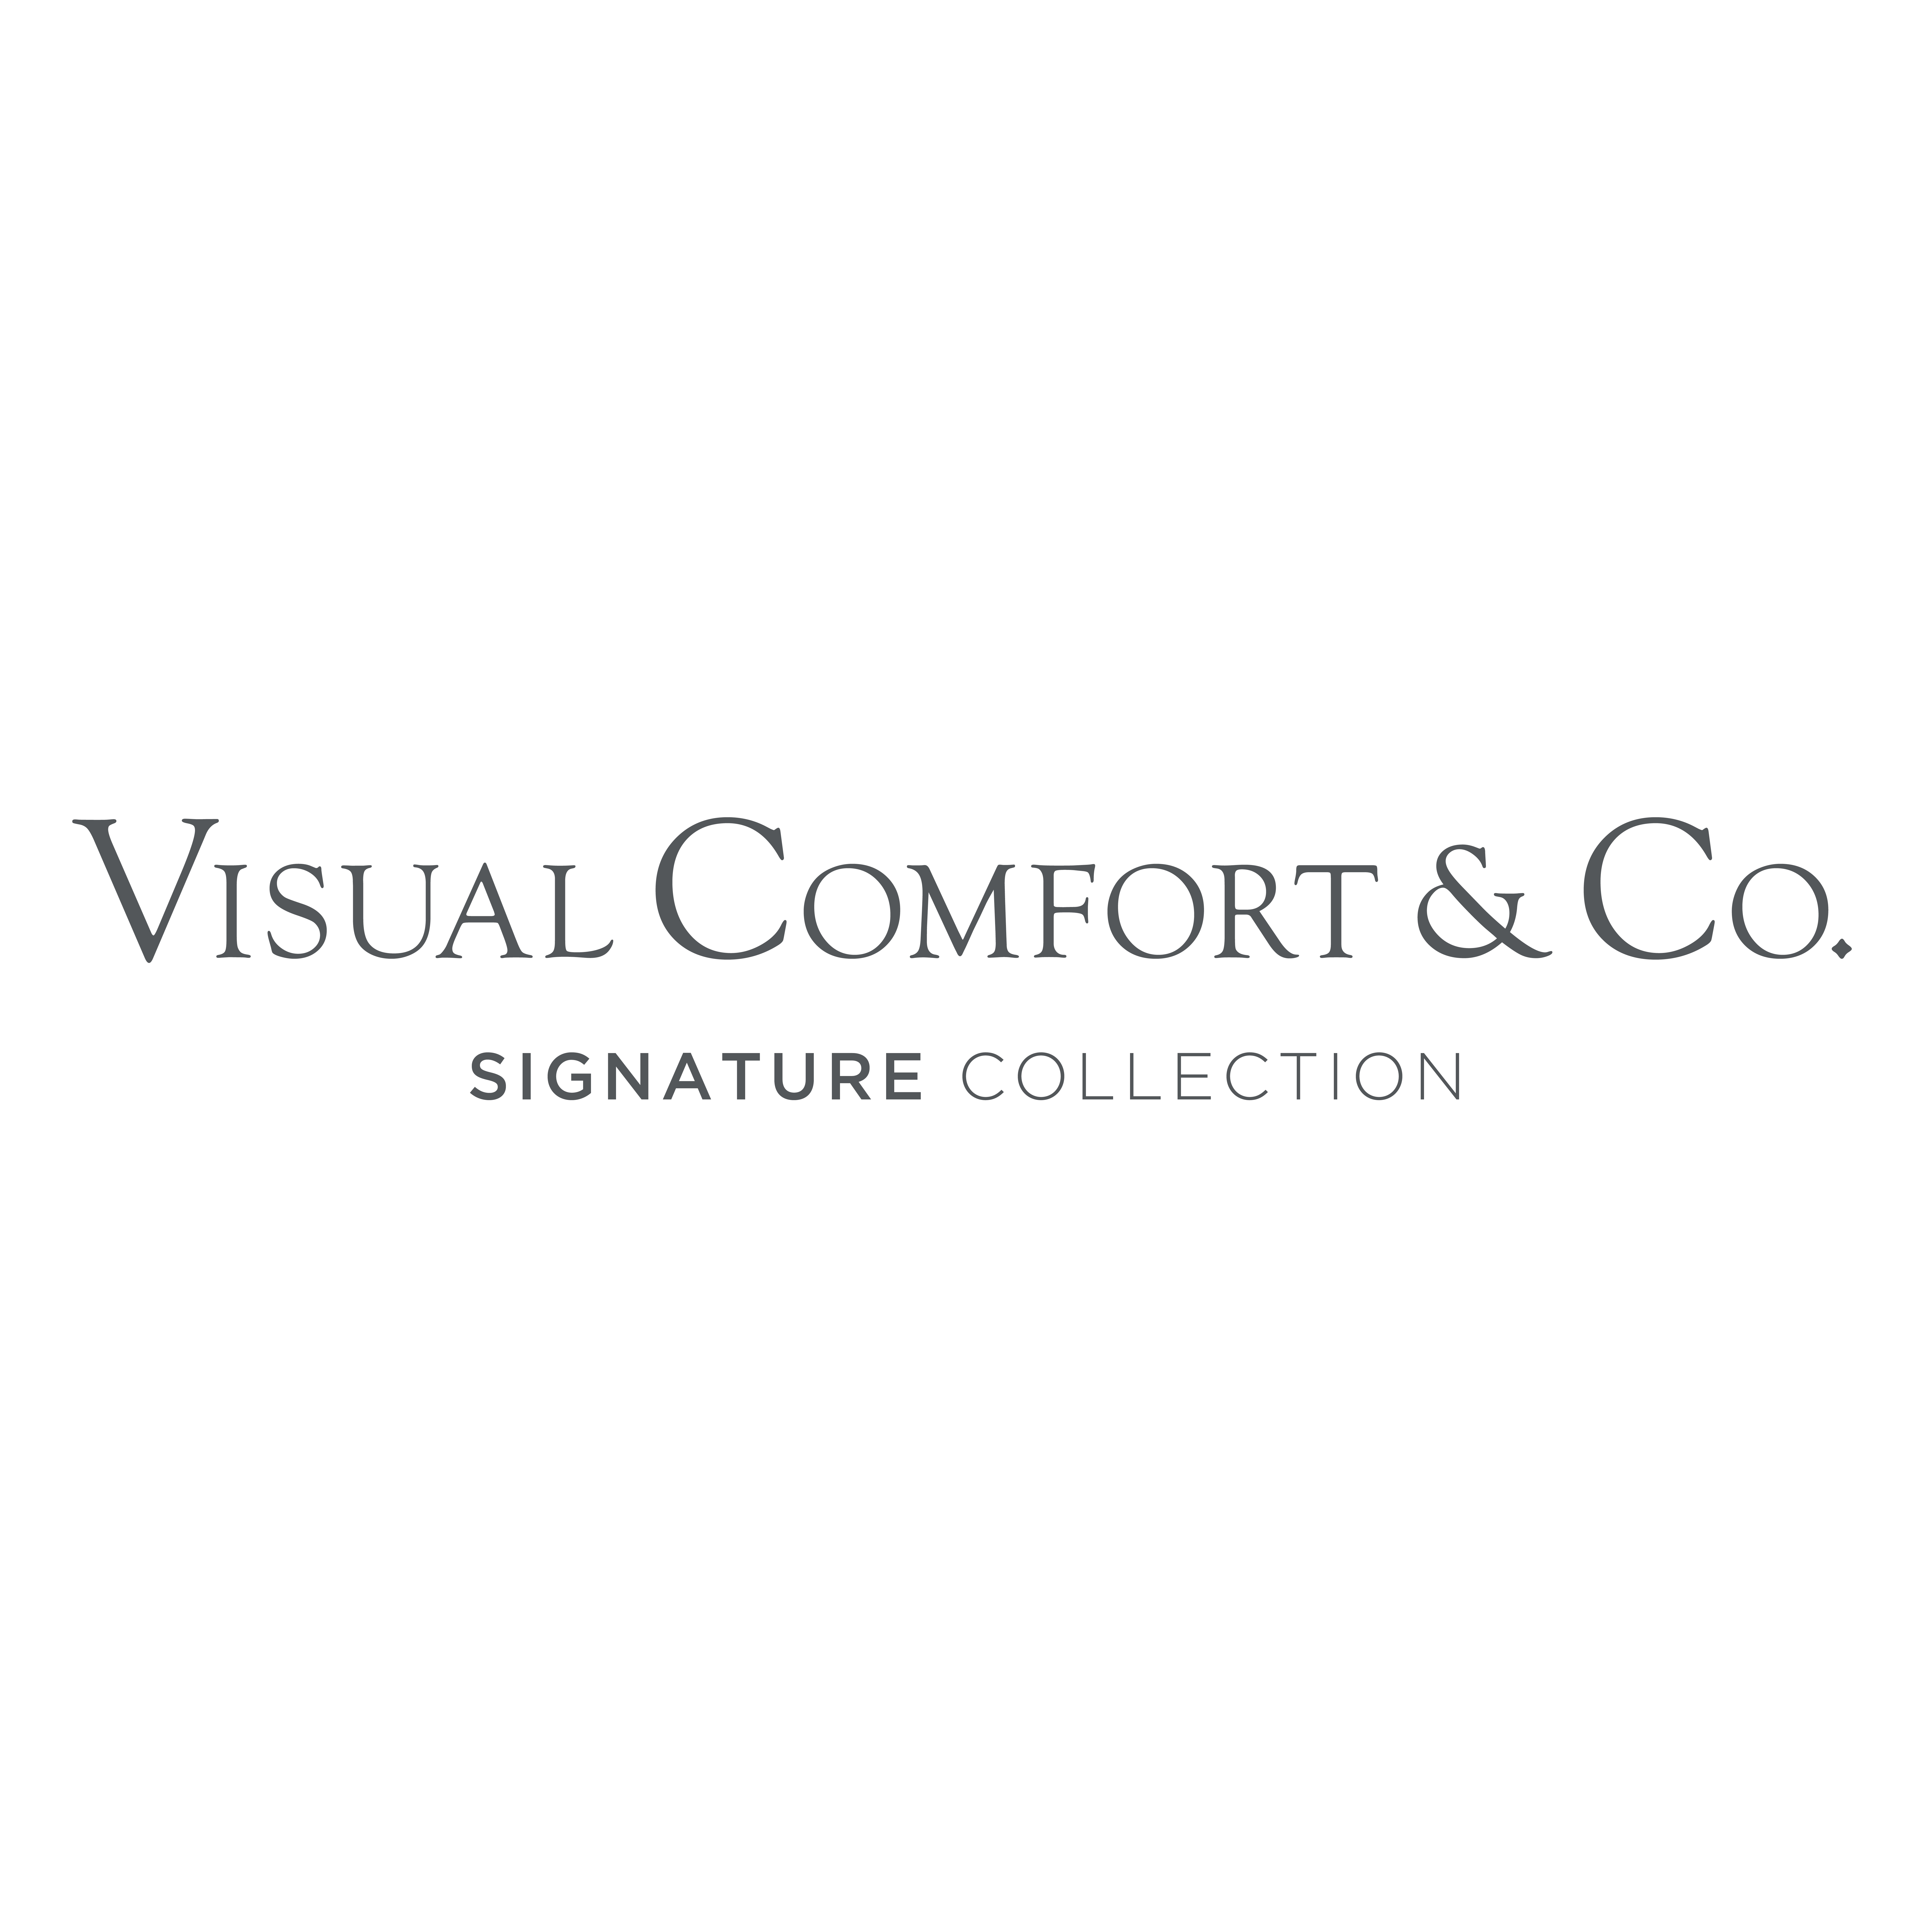 VISUAL COMFORT & CO. SIGNATURE COLLECTION in 